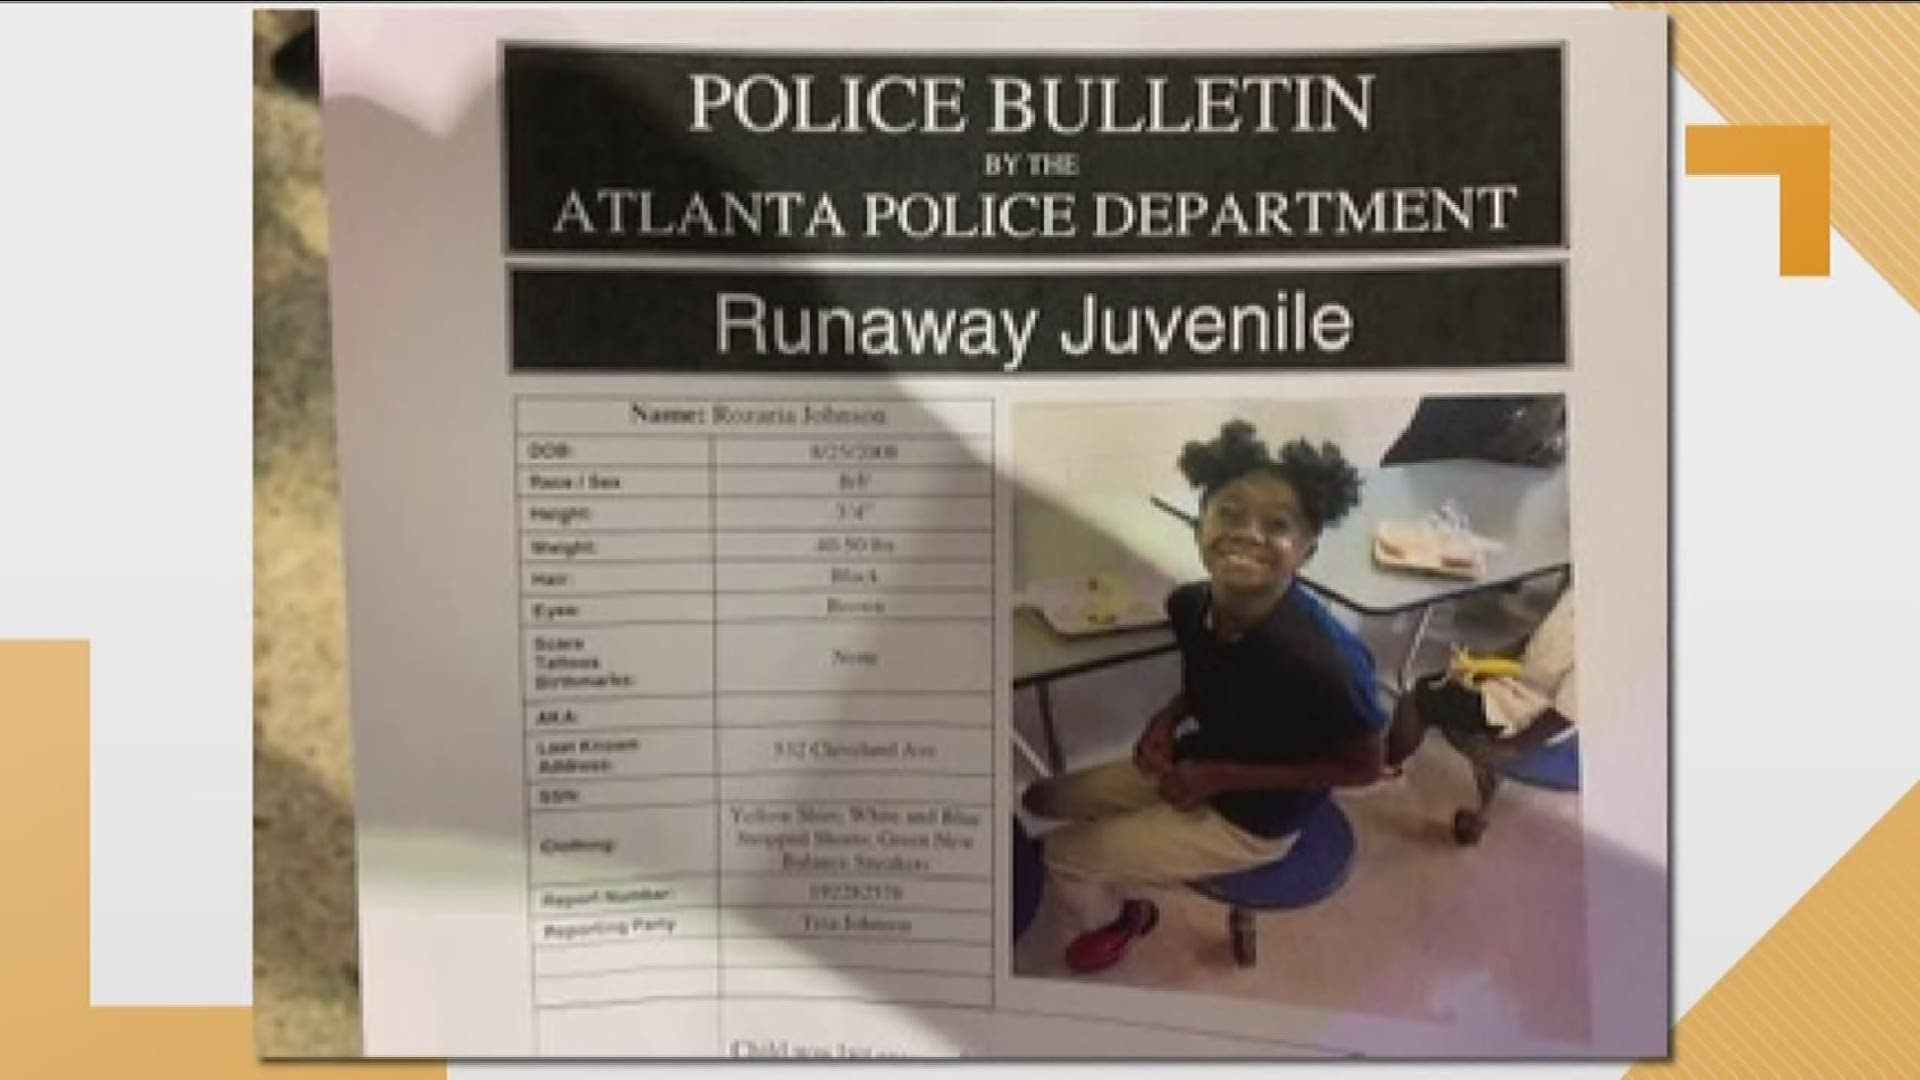 Atlanta Police are looking for 10-year-old Rozario Johnson, who they said was last seen around 5:30 Friday afternoon, Aug. 16, 2019, near 533 Cleveland Avenue, SW.